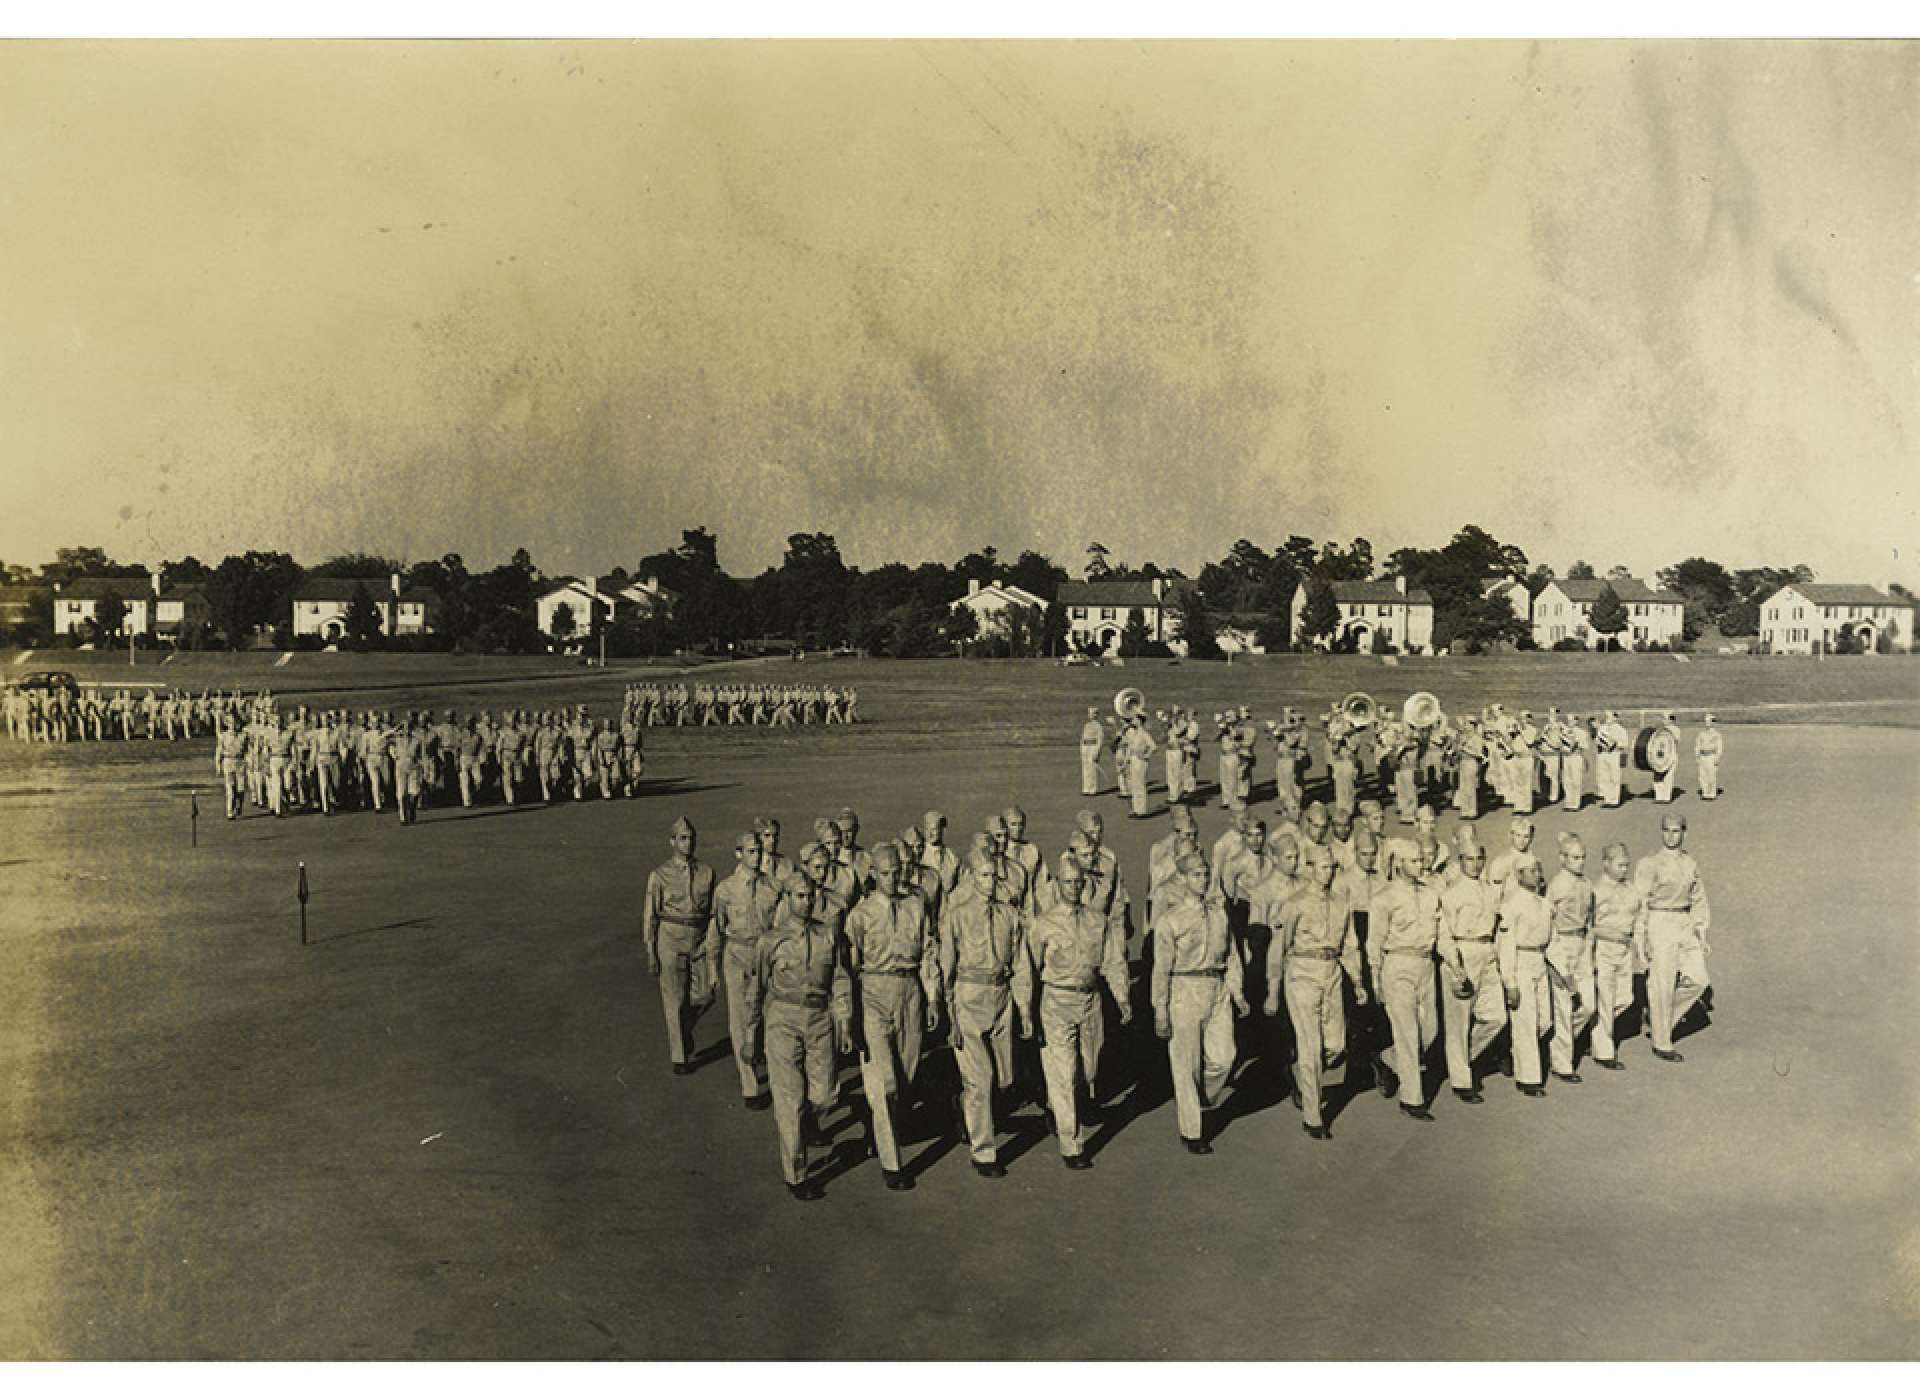 Although they would not be going into battle, the men of the 24th General Hospital underwent military training at Fort Benning, Georgia, in 1942-1943 to prepare to deploy. The National WWII Museum